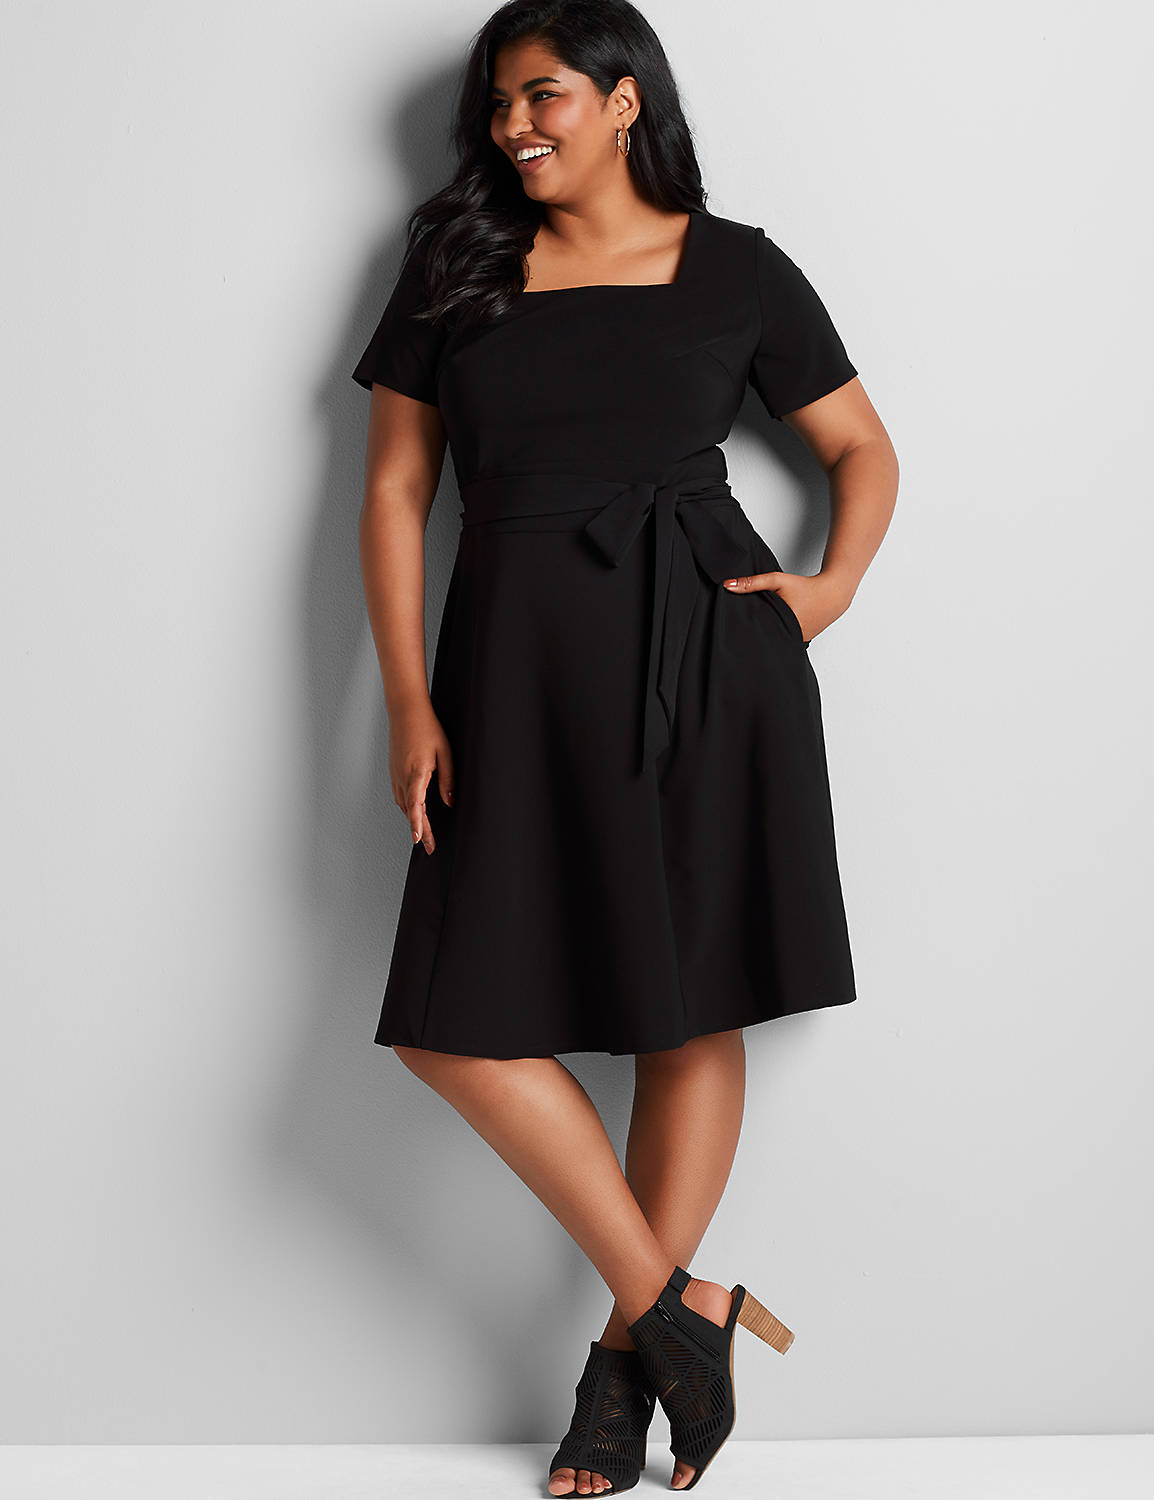 1113886- Lena Short Sleeve Square Neck Fit and Flare Dress:Pitch Black LB 1000322:12 Product Image 1